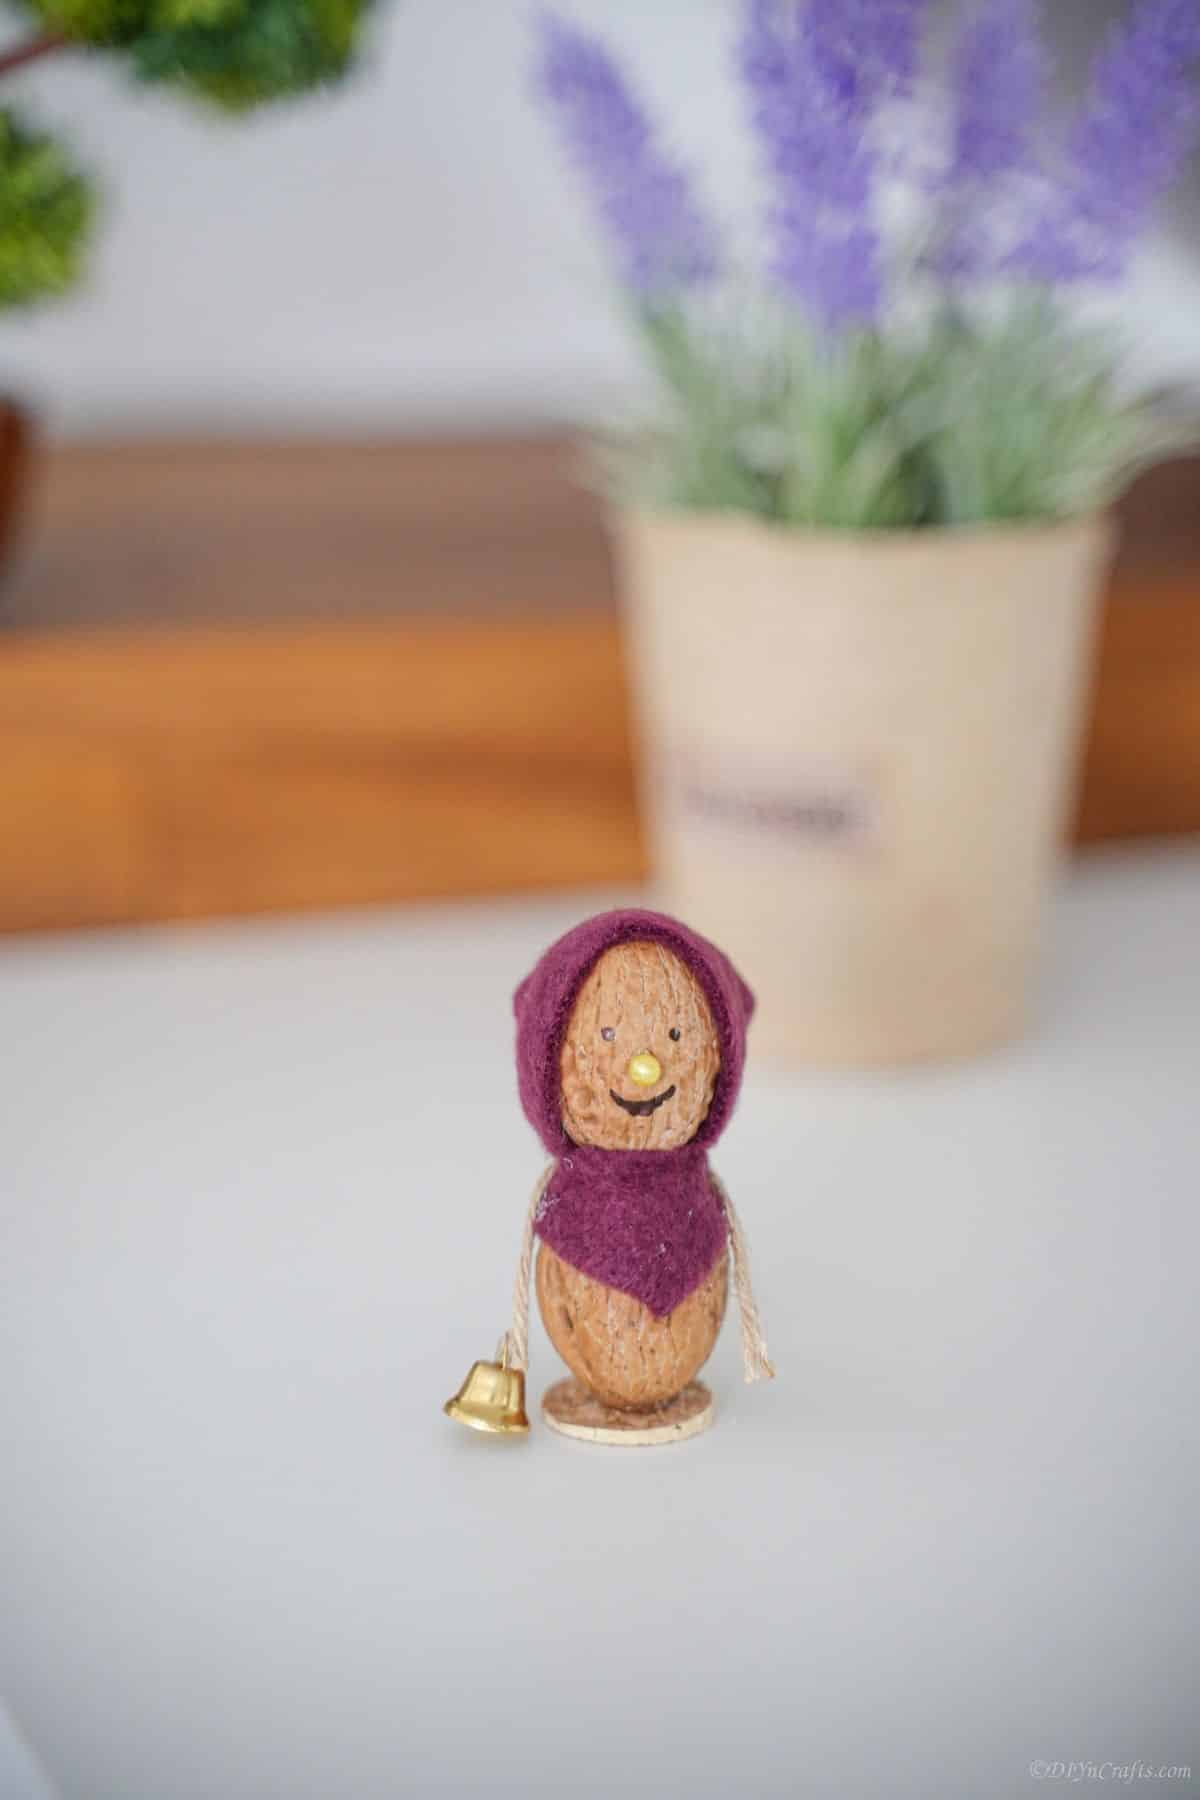 walnut mouse with purple bonnet on white table with plant in background